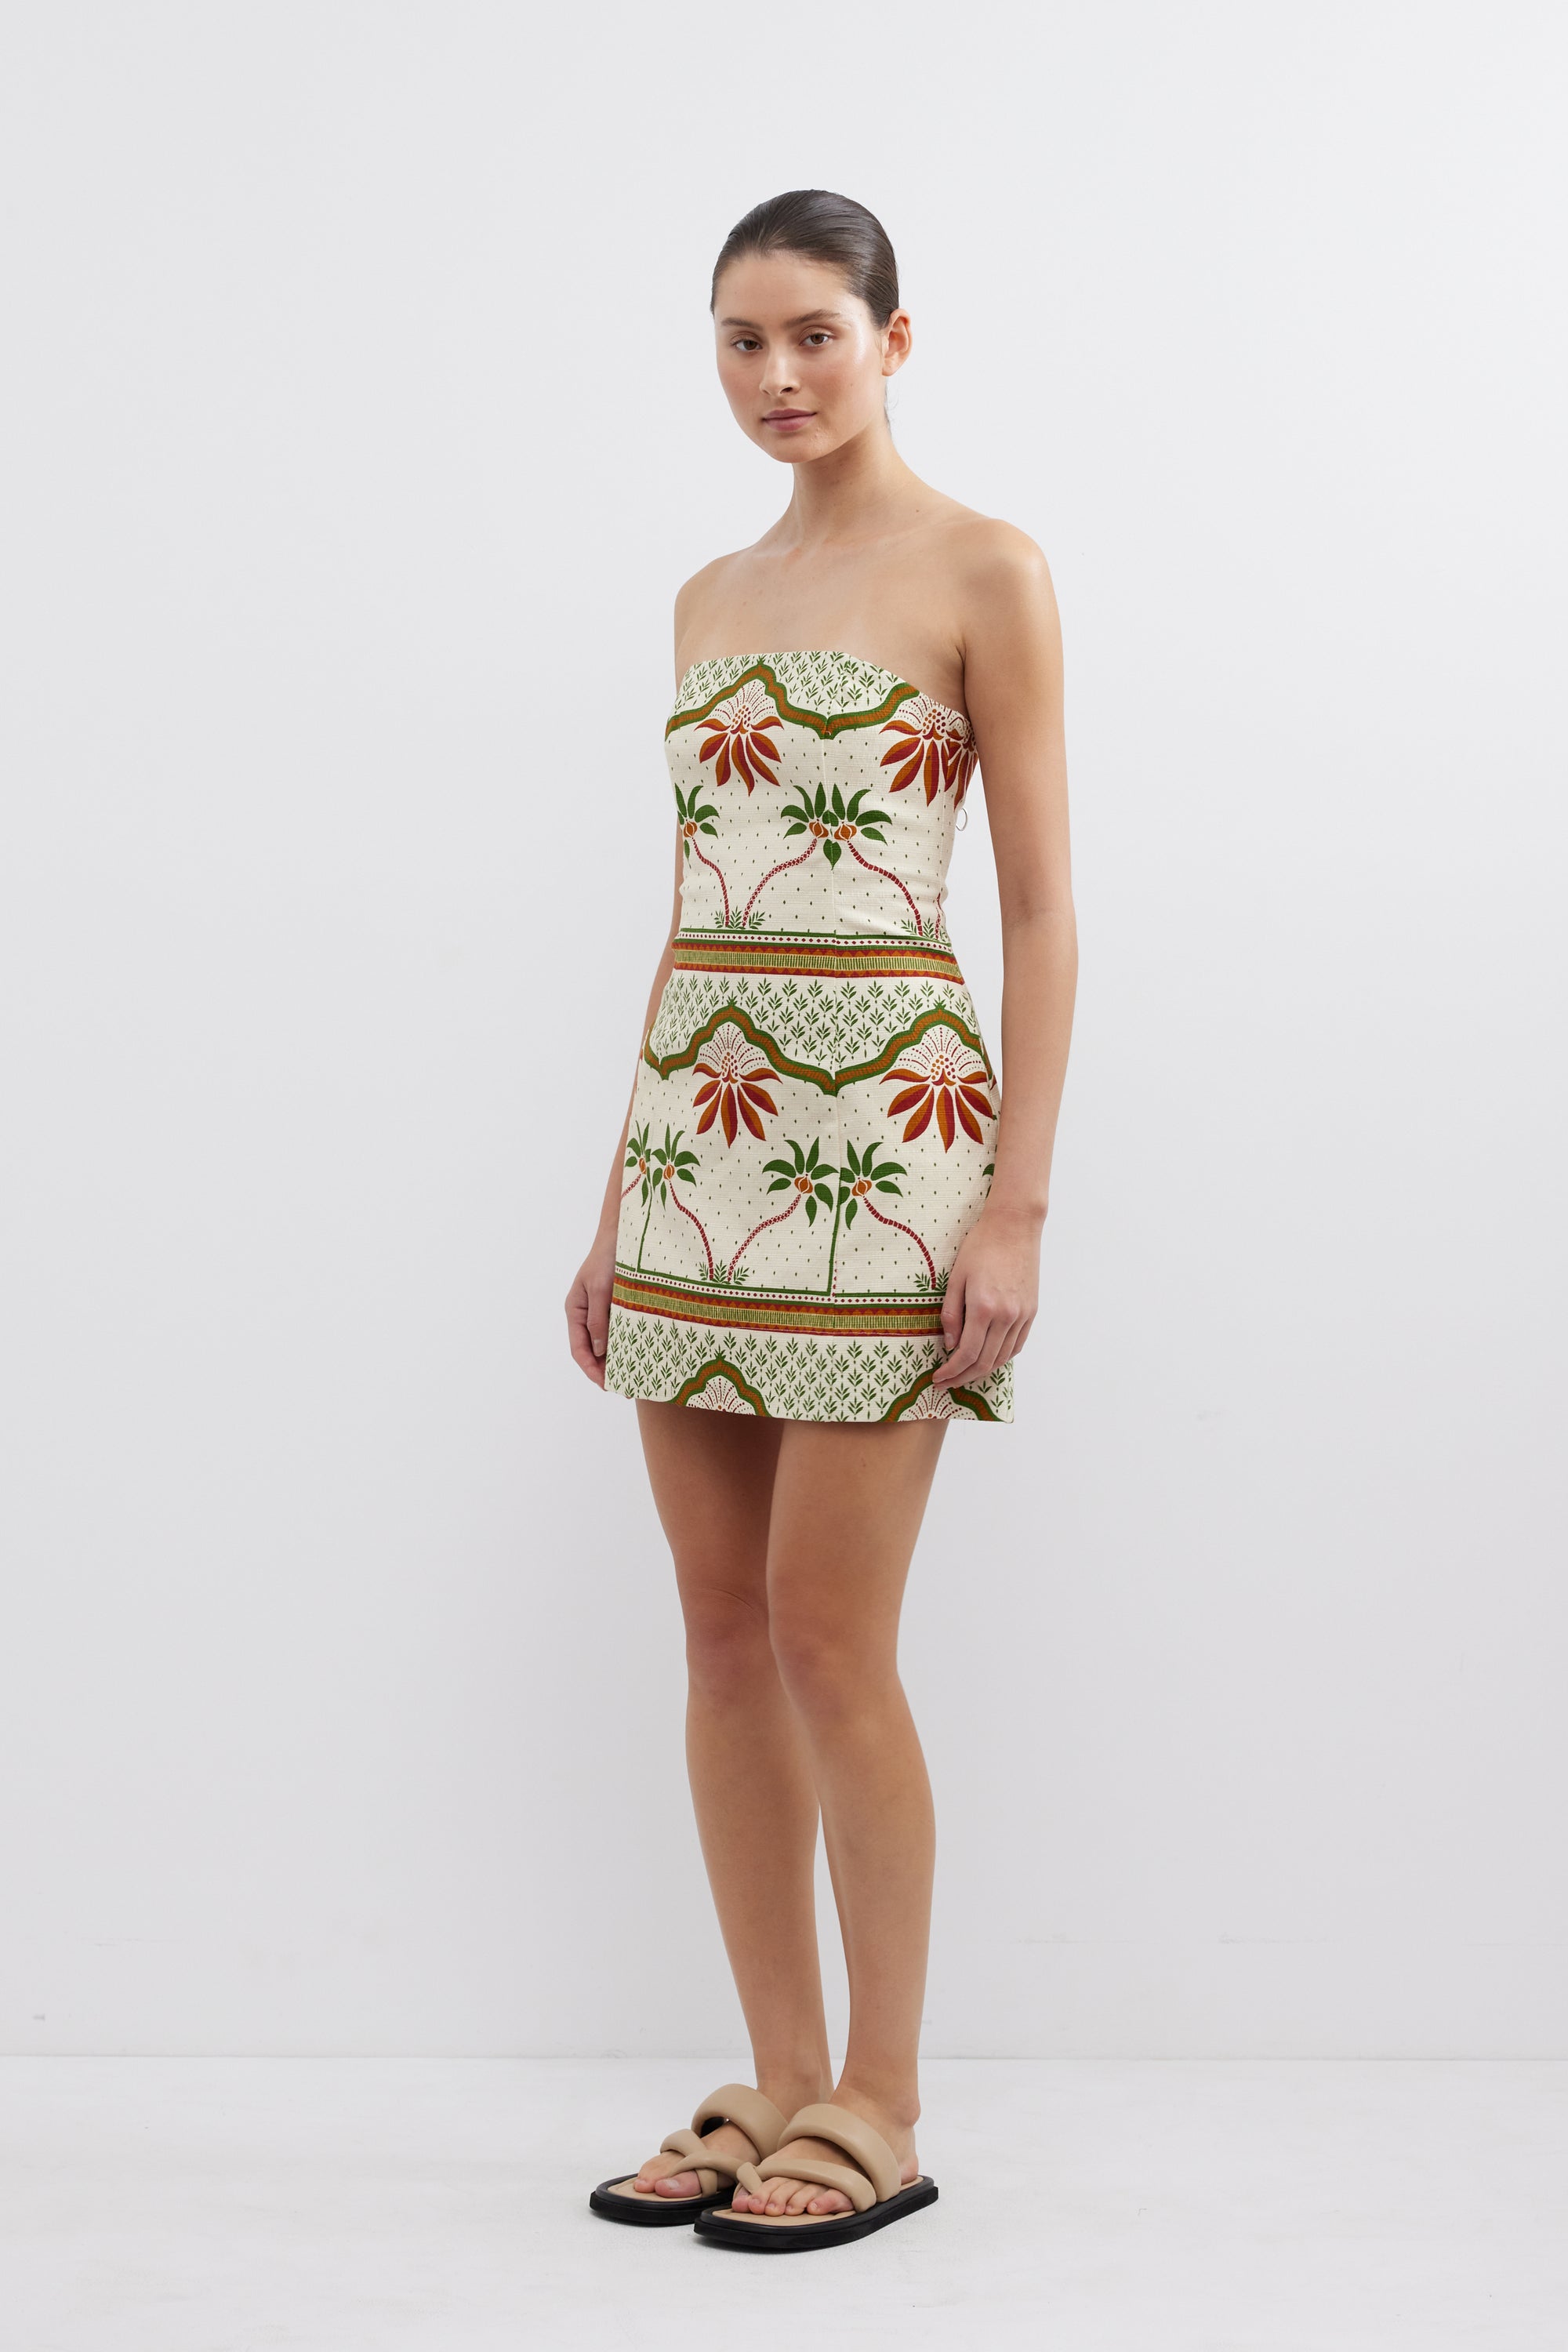 Vida Strapless Dress - TAKE 40% OFF DISCOUNT APPLIED AT CHECKOUT